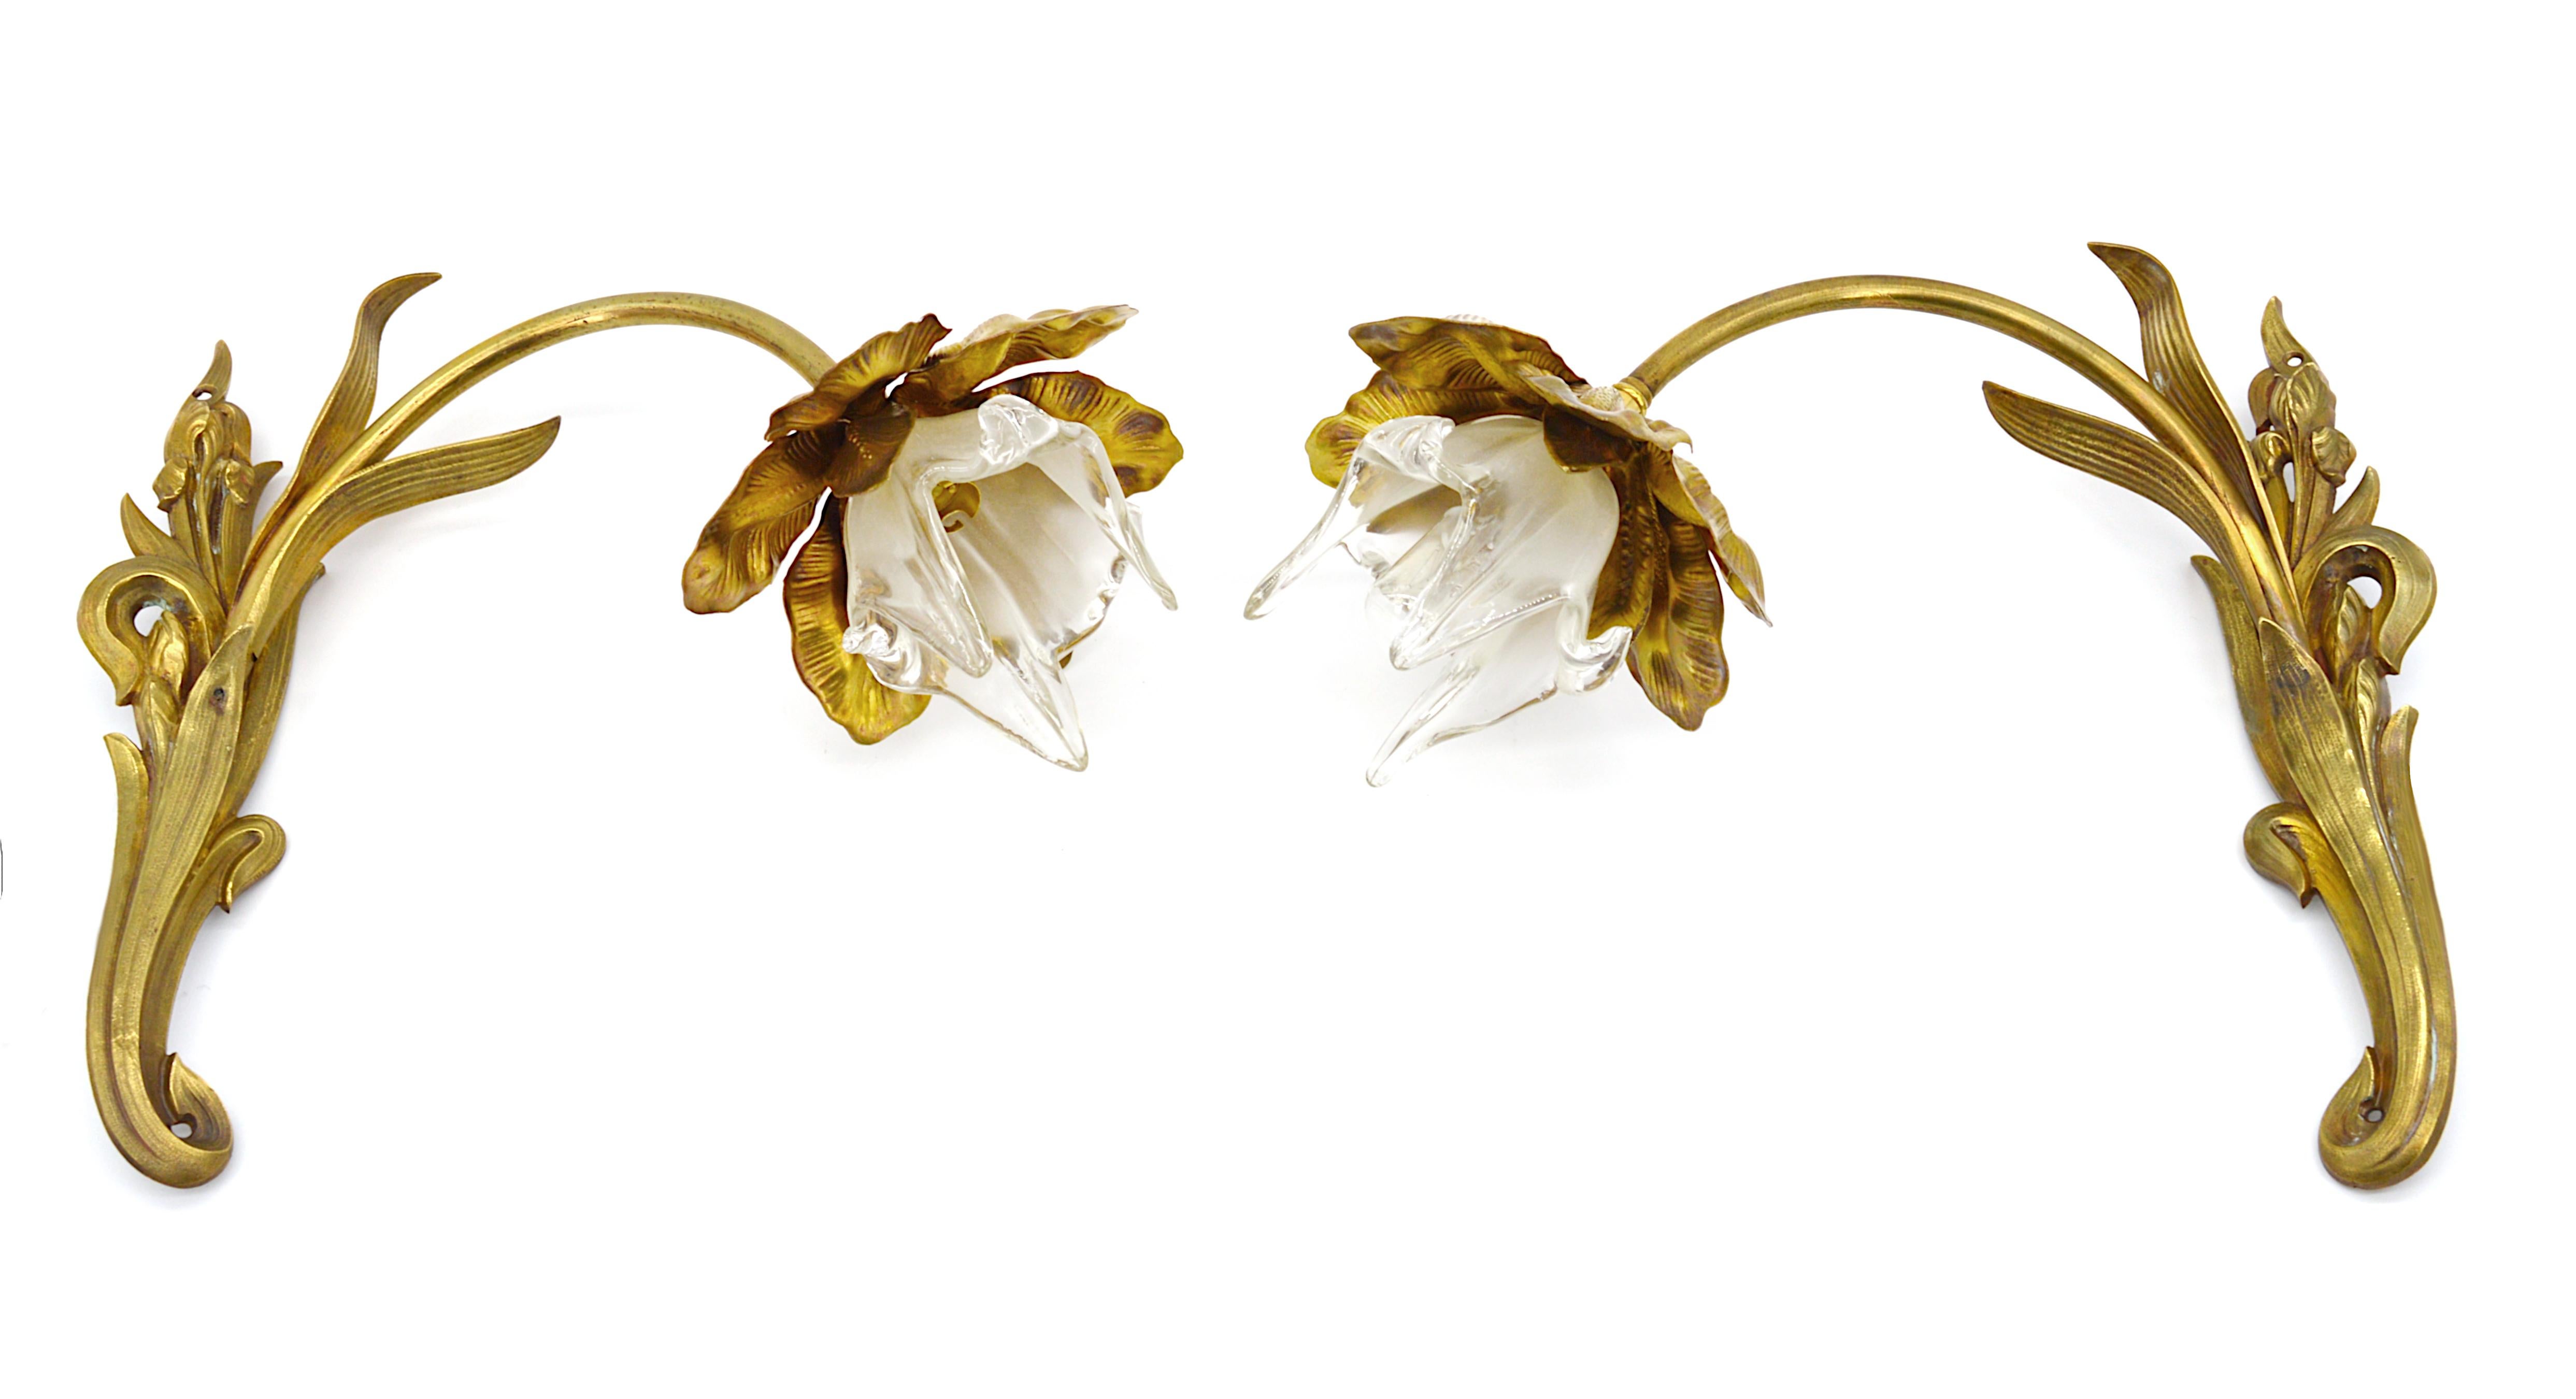 French Art Nouveau pair of wall sconces, France, circa 1900. Bonze and glass. Each wall light represents an iris. Lampshades are made of glass worked with pliers. The glass is partially frosted. Measures: Height 11.2